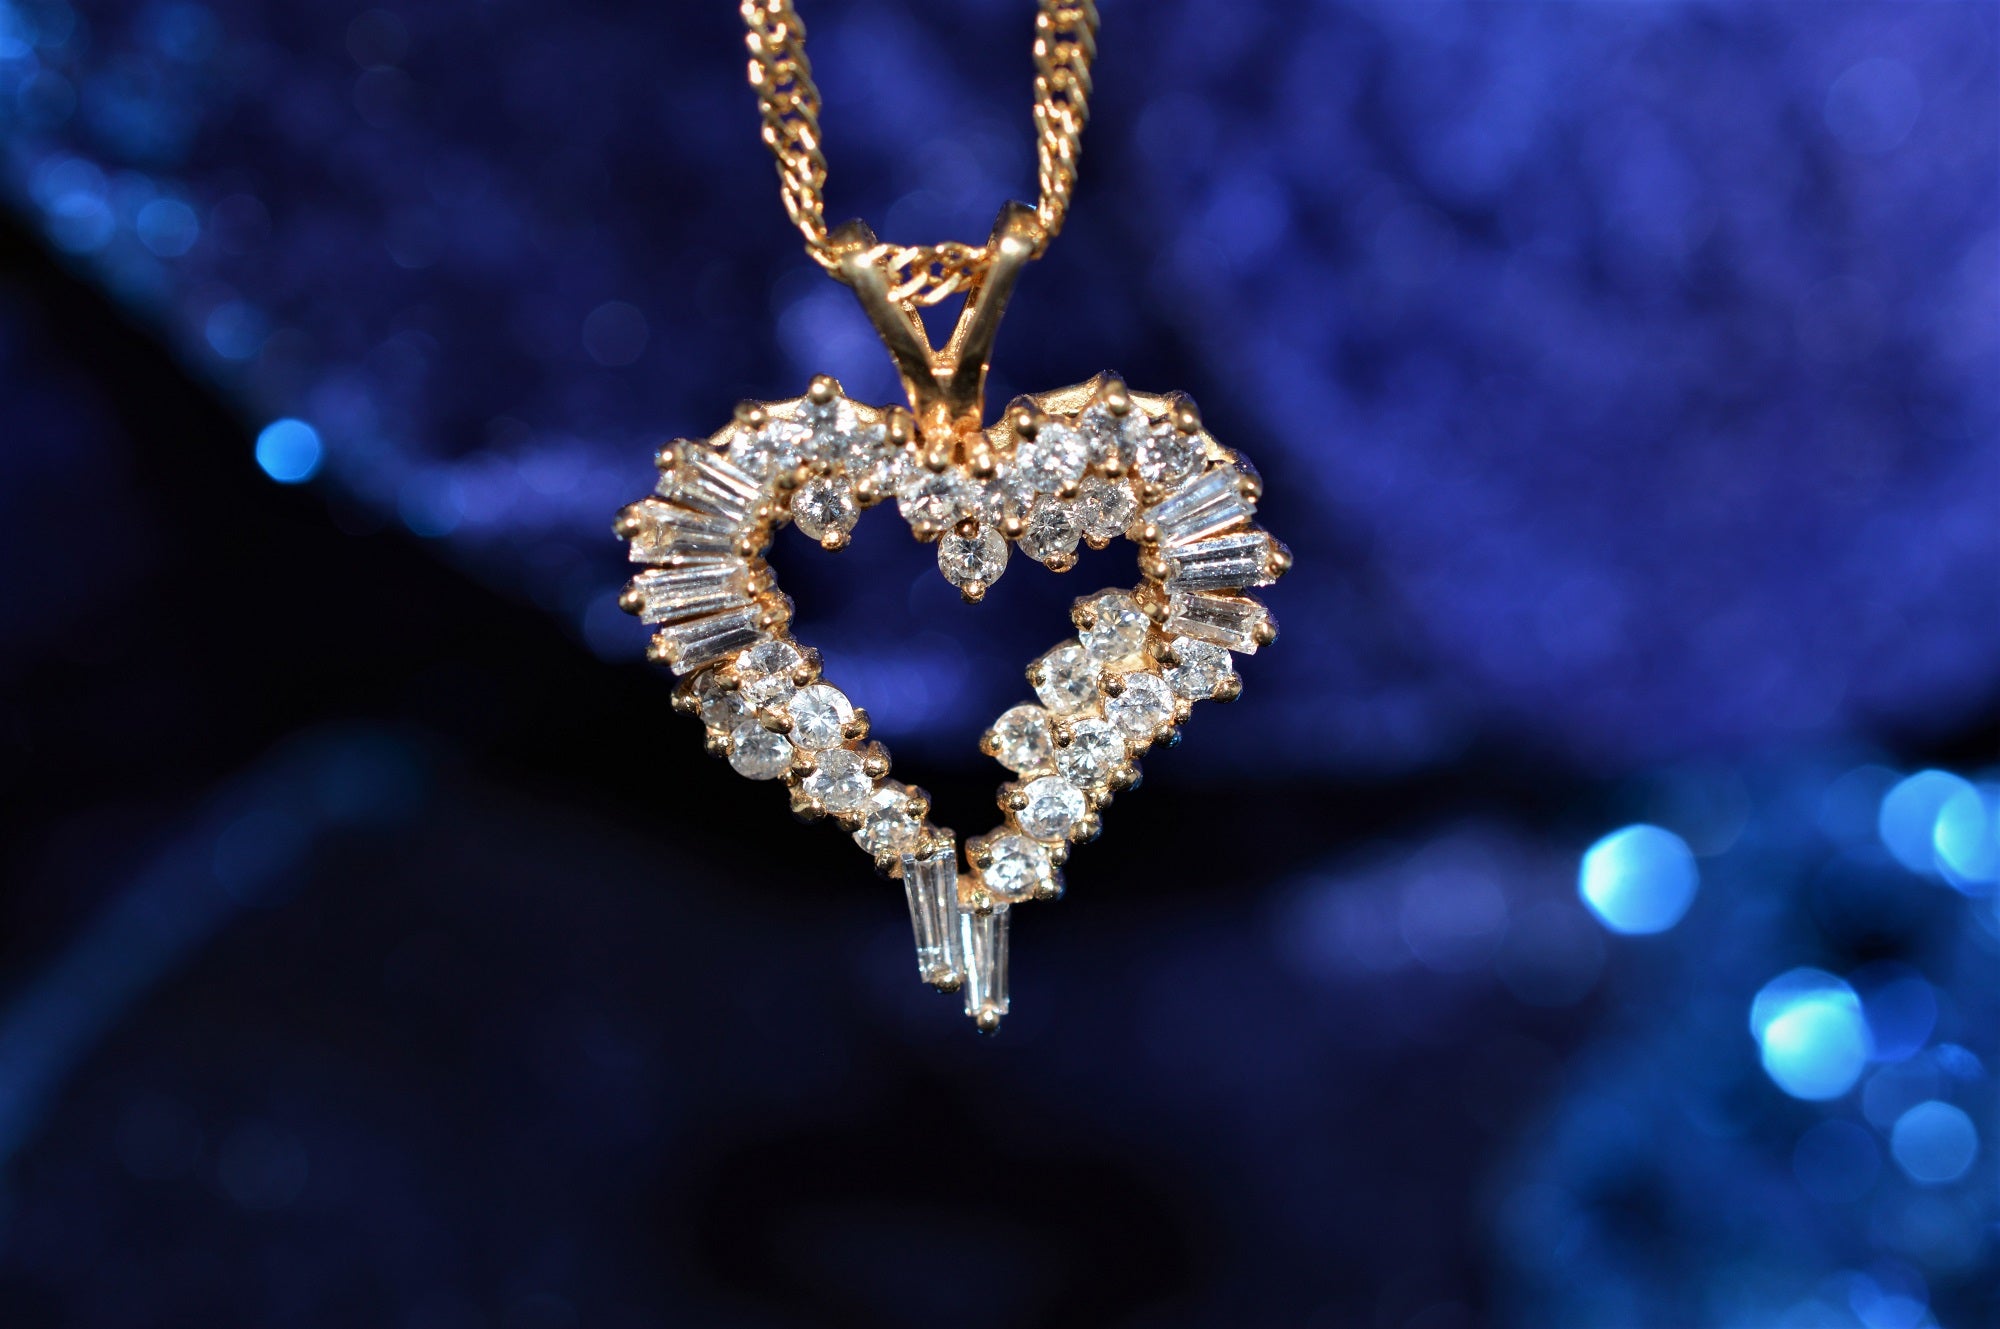 14K Yellow Gold Heart Locket Necklace, 22 - 100% Exclusive